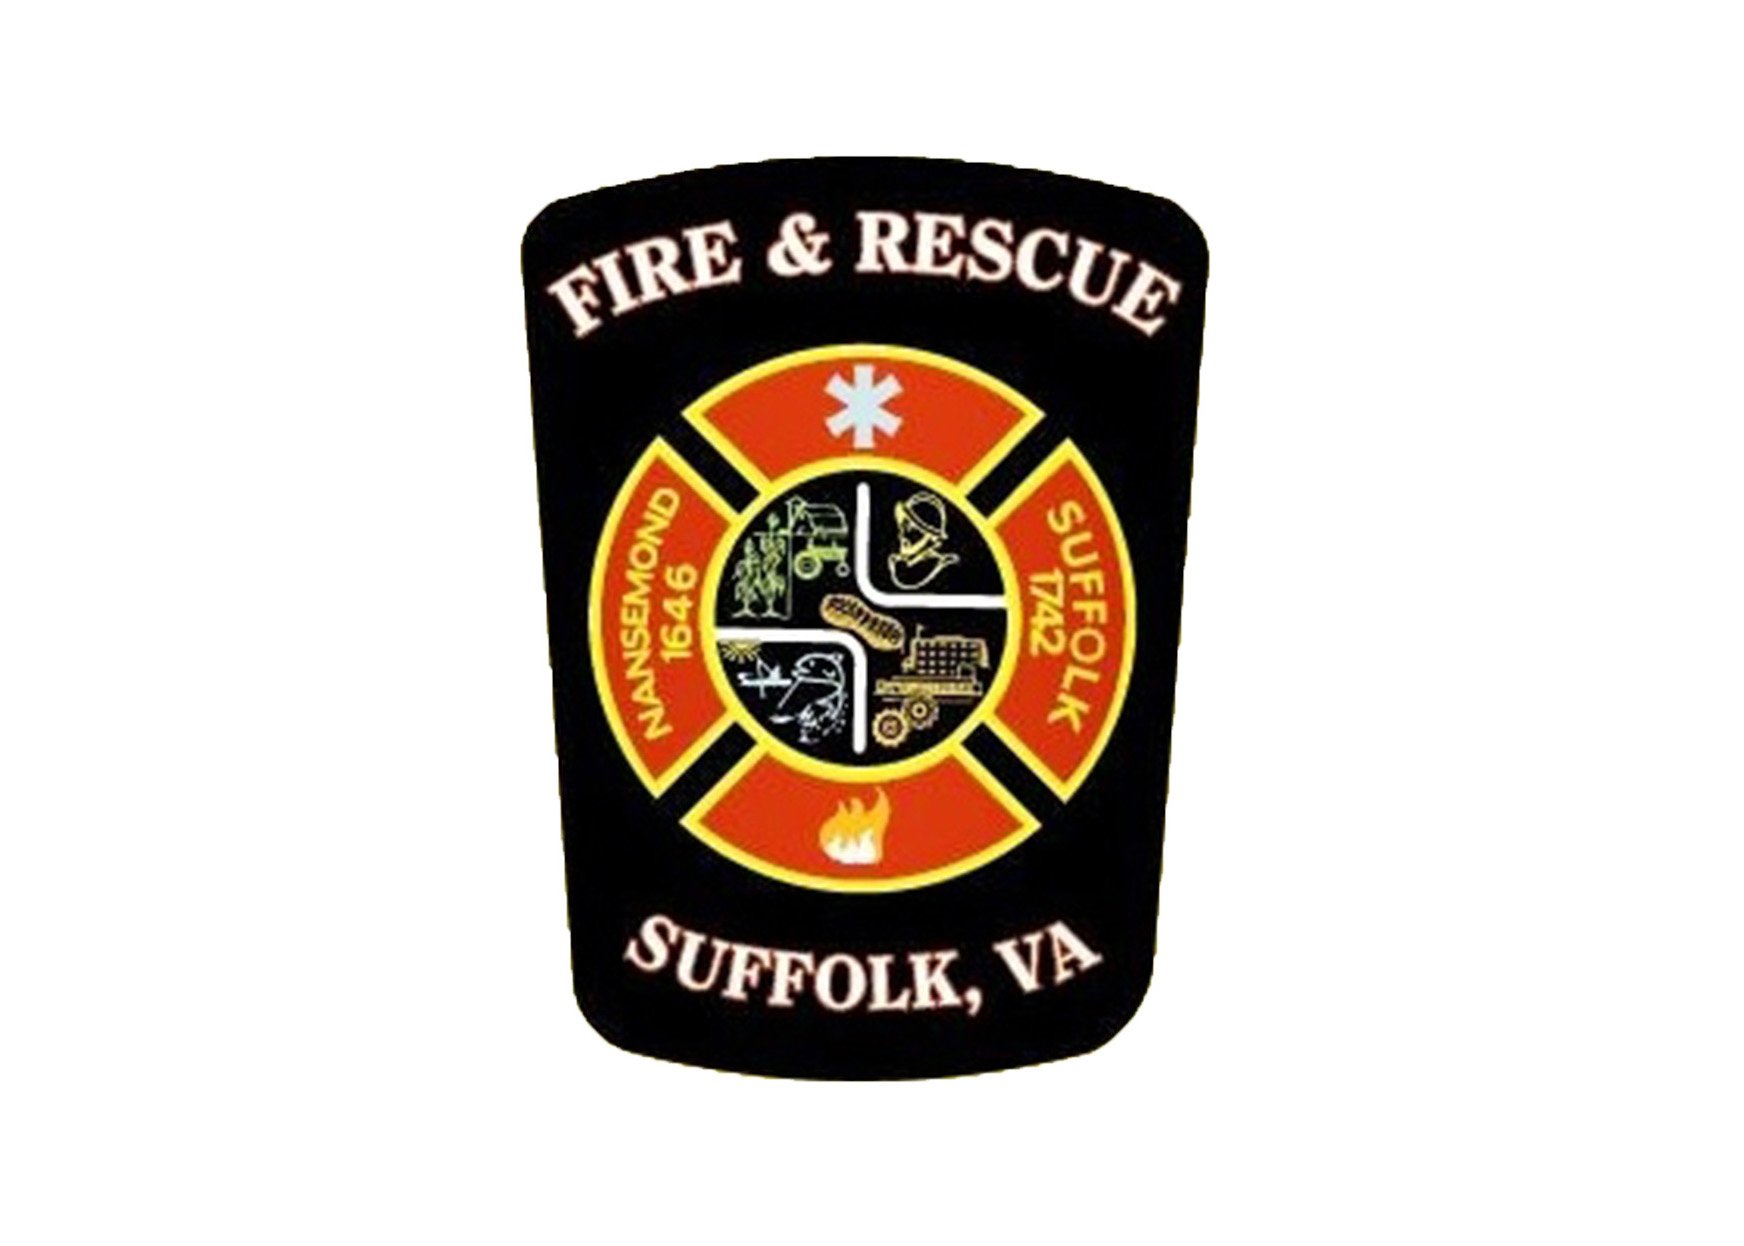 News and events from Suffolk Fire & Rescue. This site is not monitored; call 911 for emergencies. Comments and list of followers subject to public disclosure.